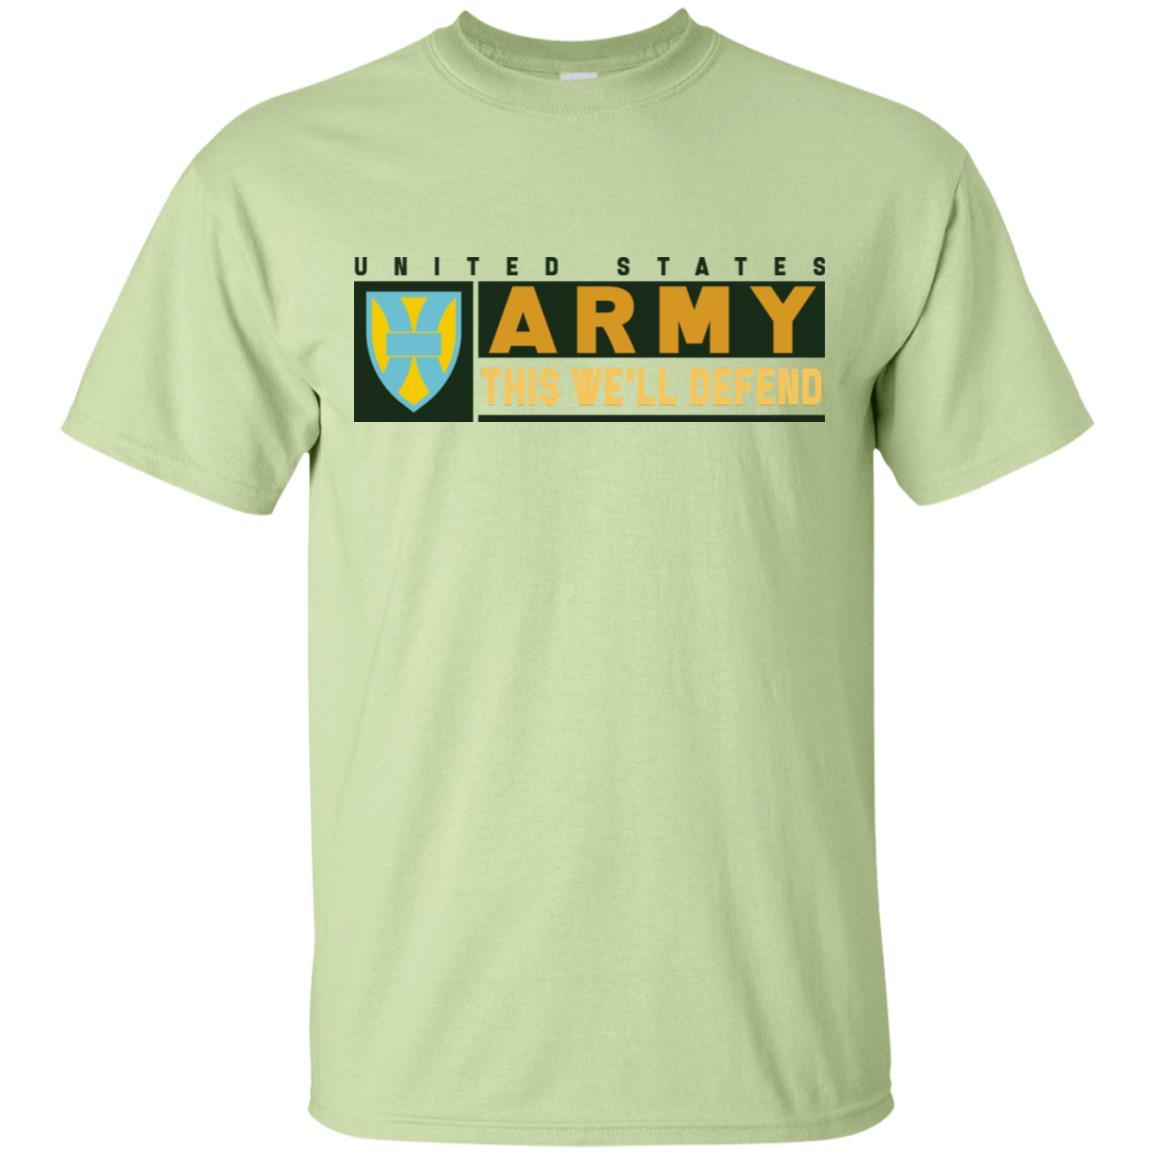 US Army 21ST SUSTAINMENT COMMAND- This We'll Defend T-Shirt On Front For Men-TShirt-Army-Veterans Nation